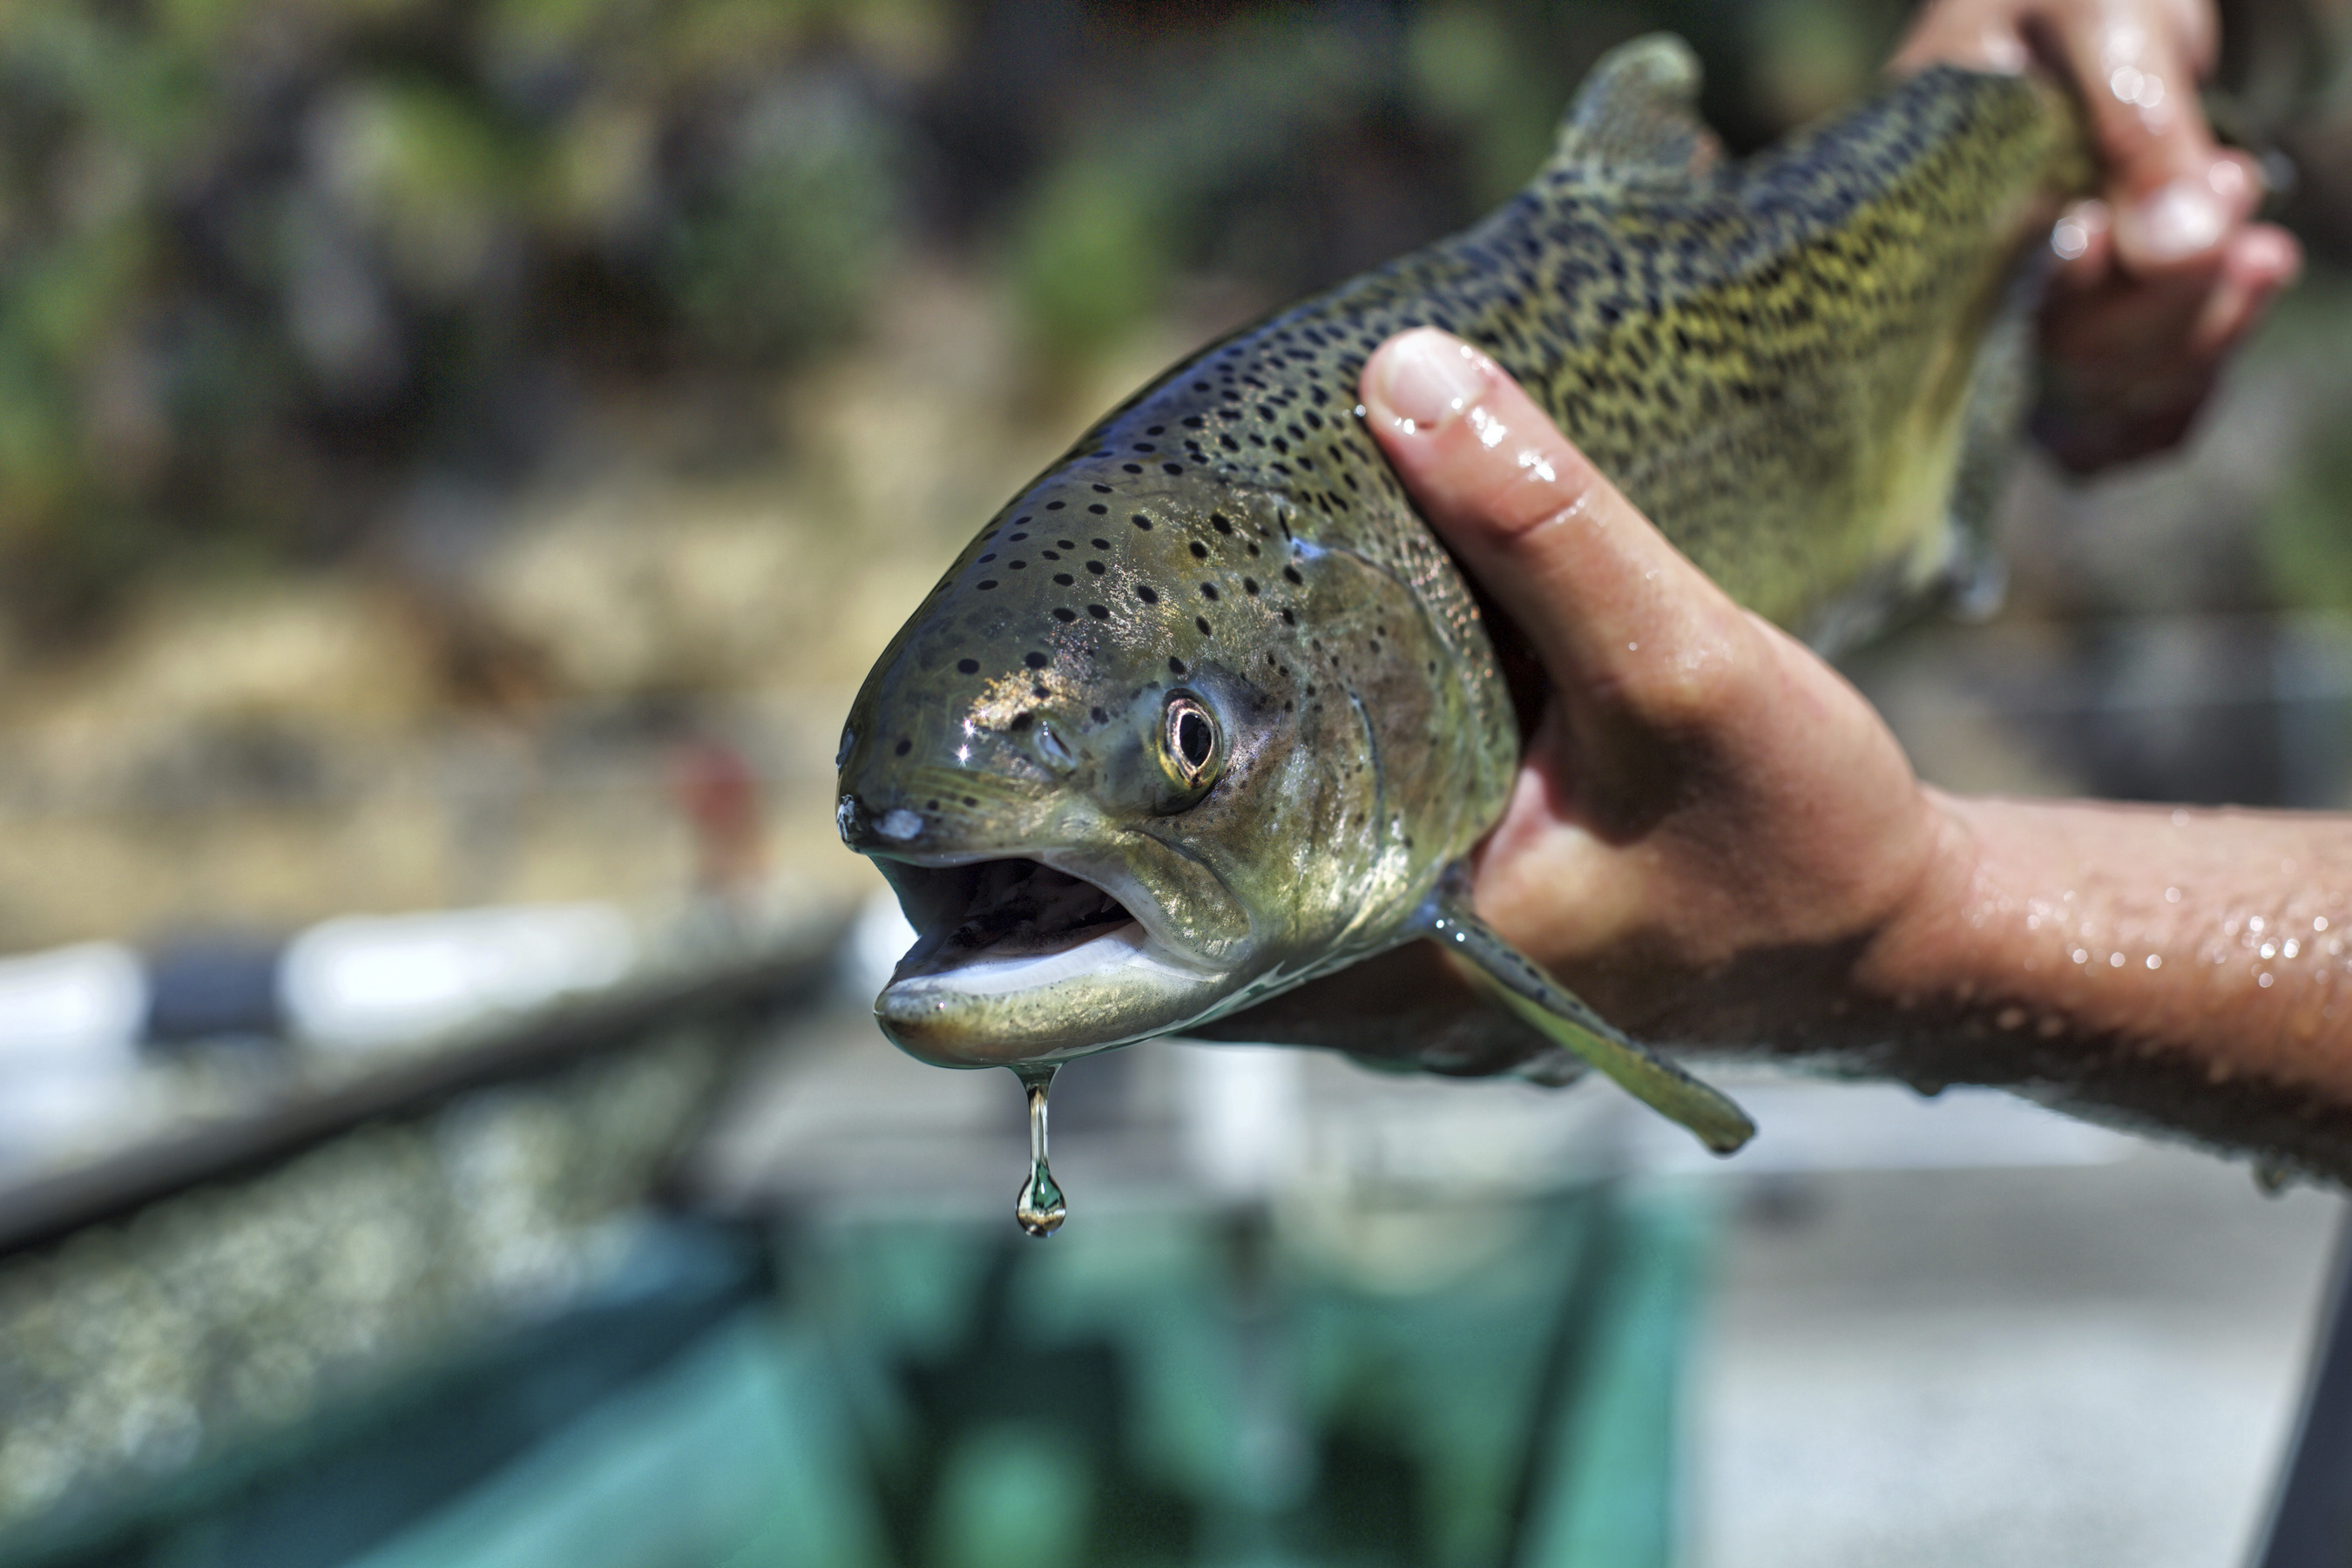 A person holds up a green and brown speckled fish with its mouth open